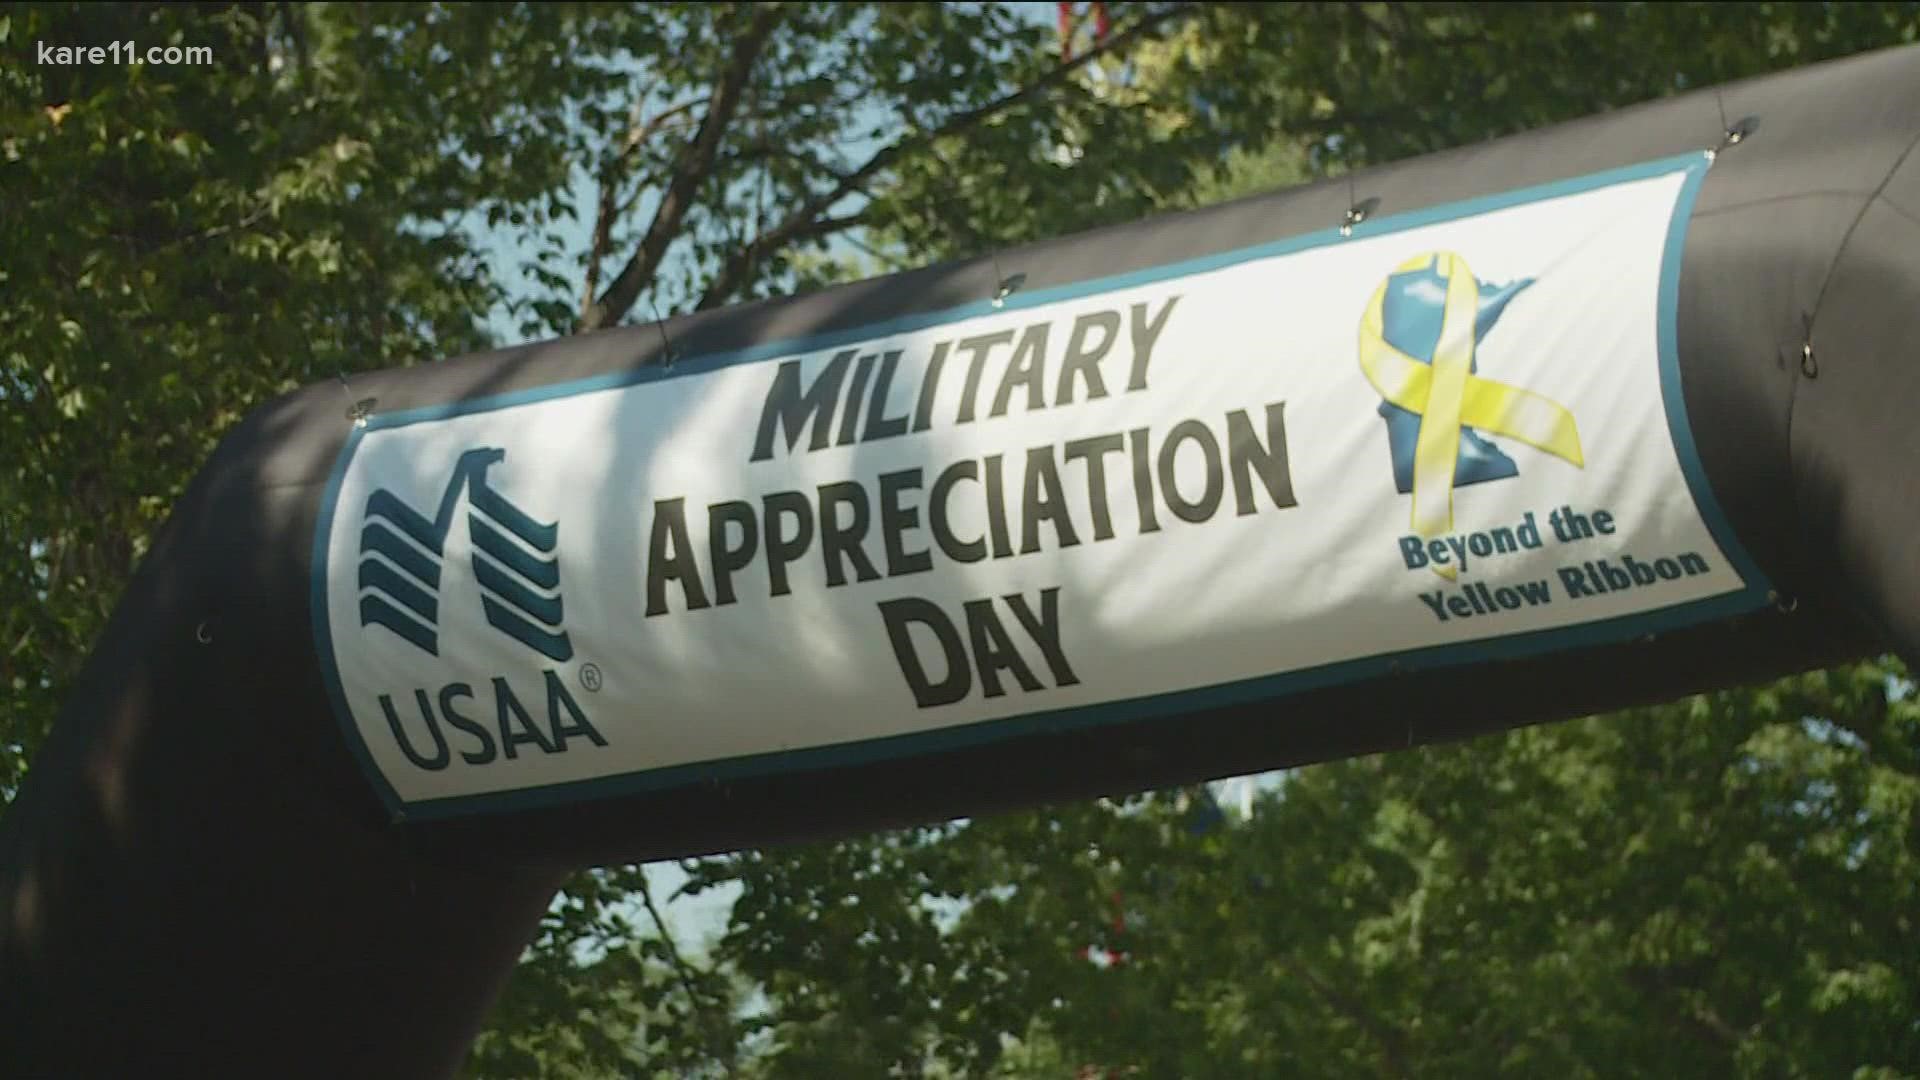 "It's really a great opportunity to say thank you." Tuesday was the fair's tenth Military Appreciation Day.